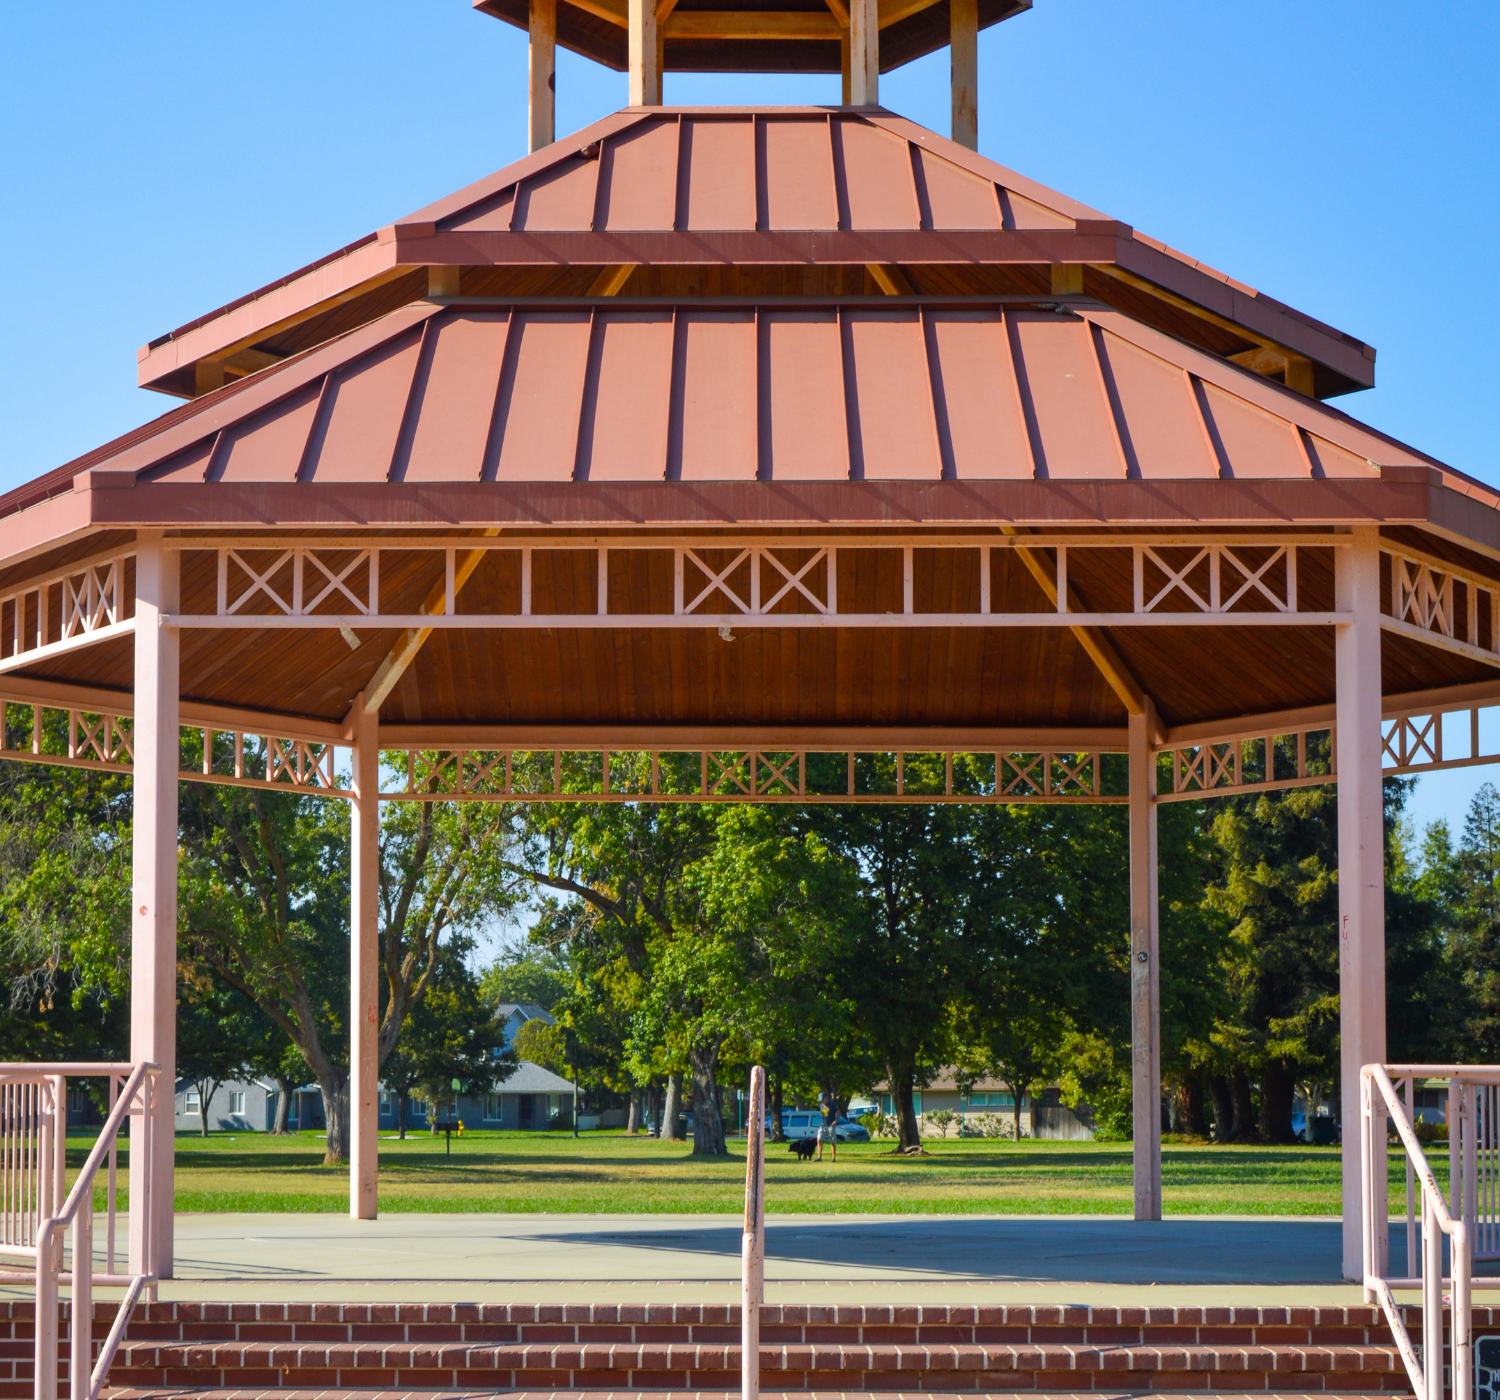 Shade structure with red roof on a sunny day